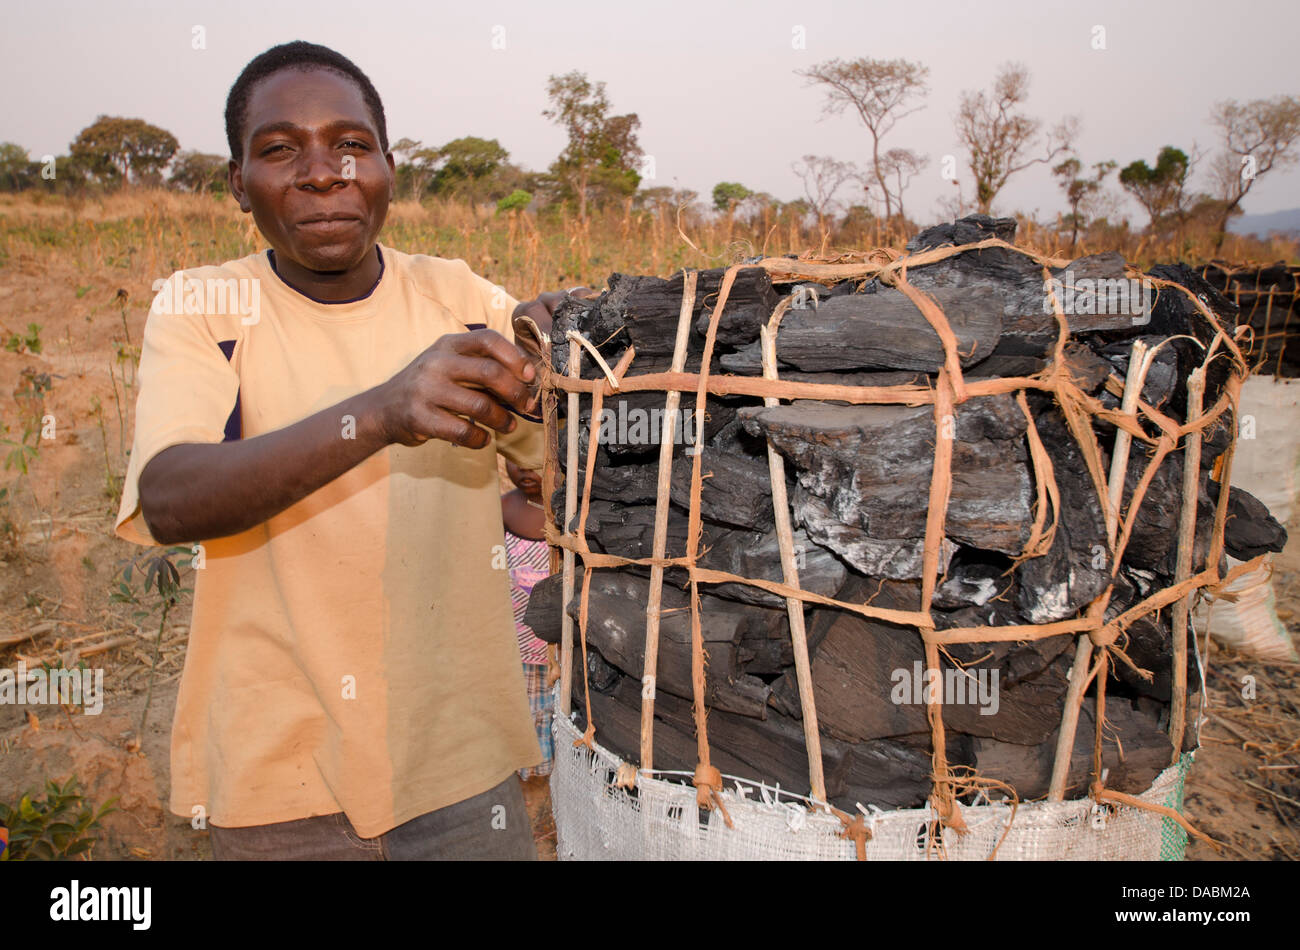 Charcoal maker selling charcoal on the side of the road, Zambia, Africa Stock Photo